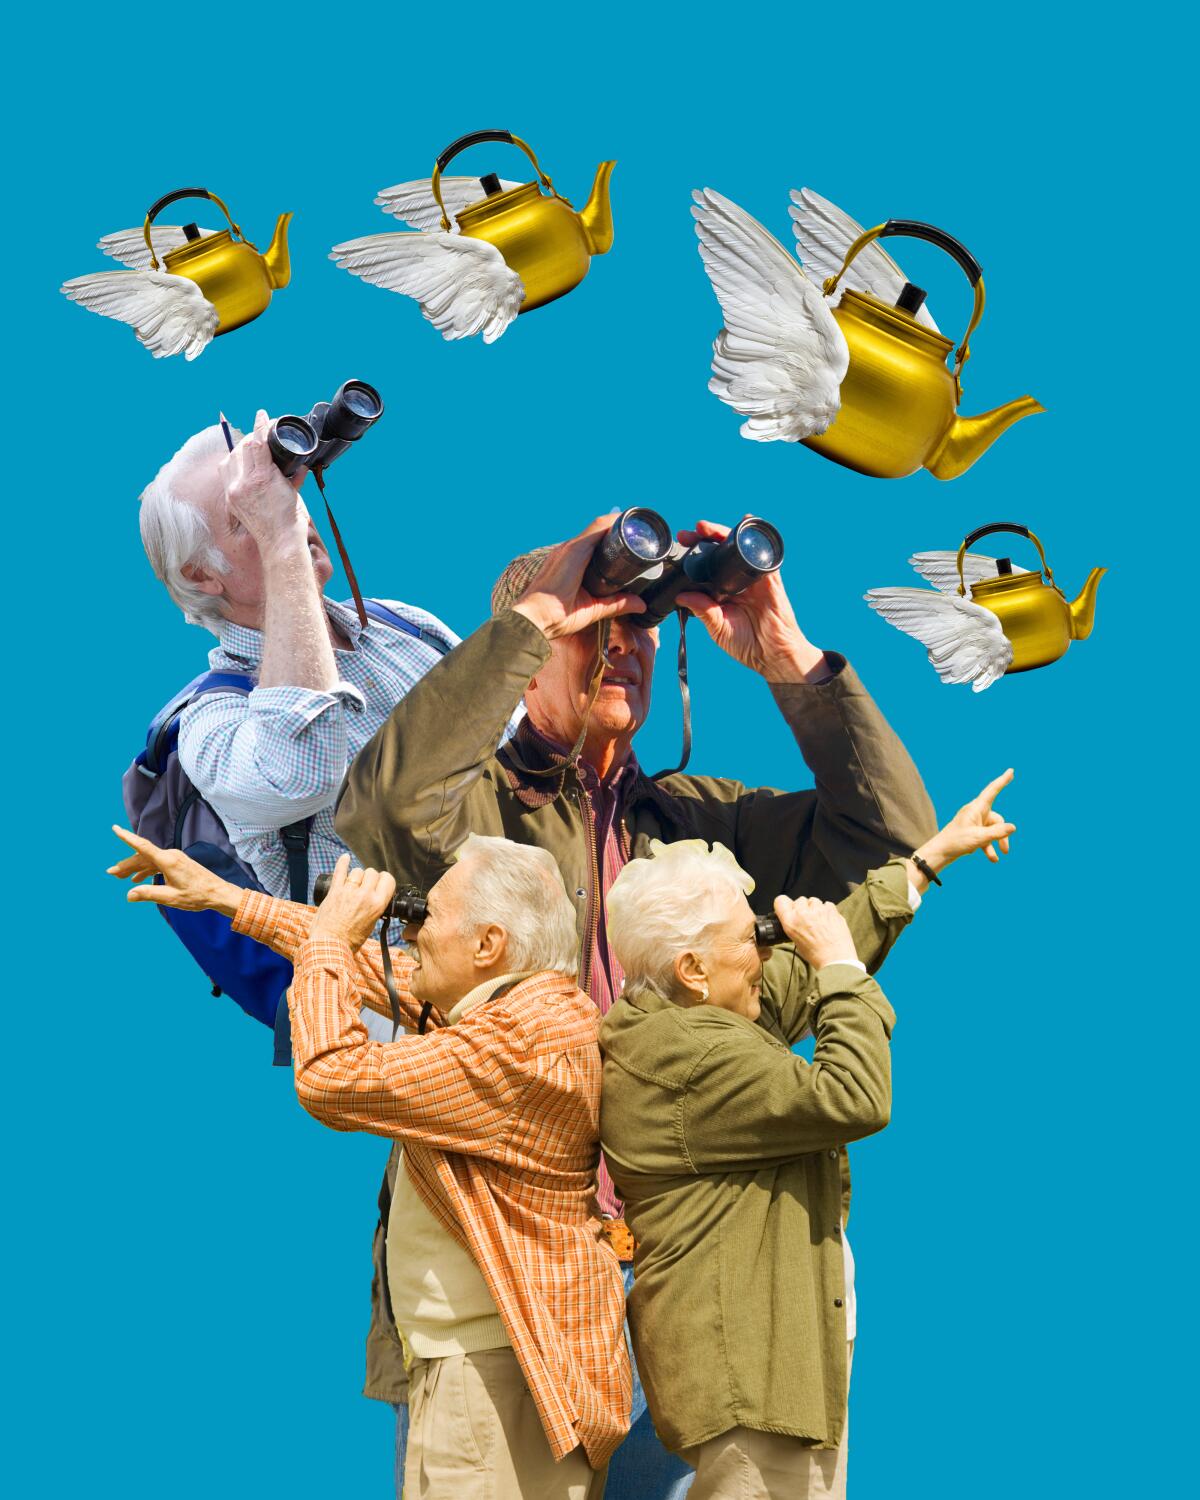 An illustration of tea kettles with wings and people with binoculars